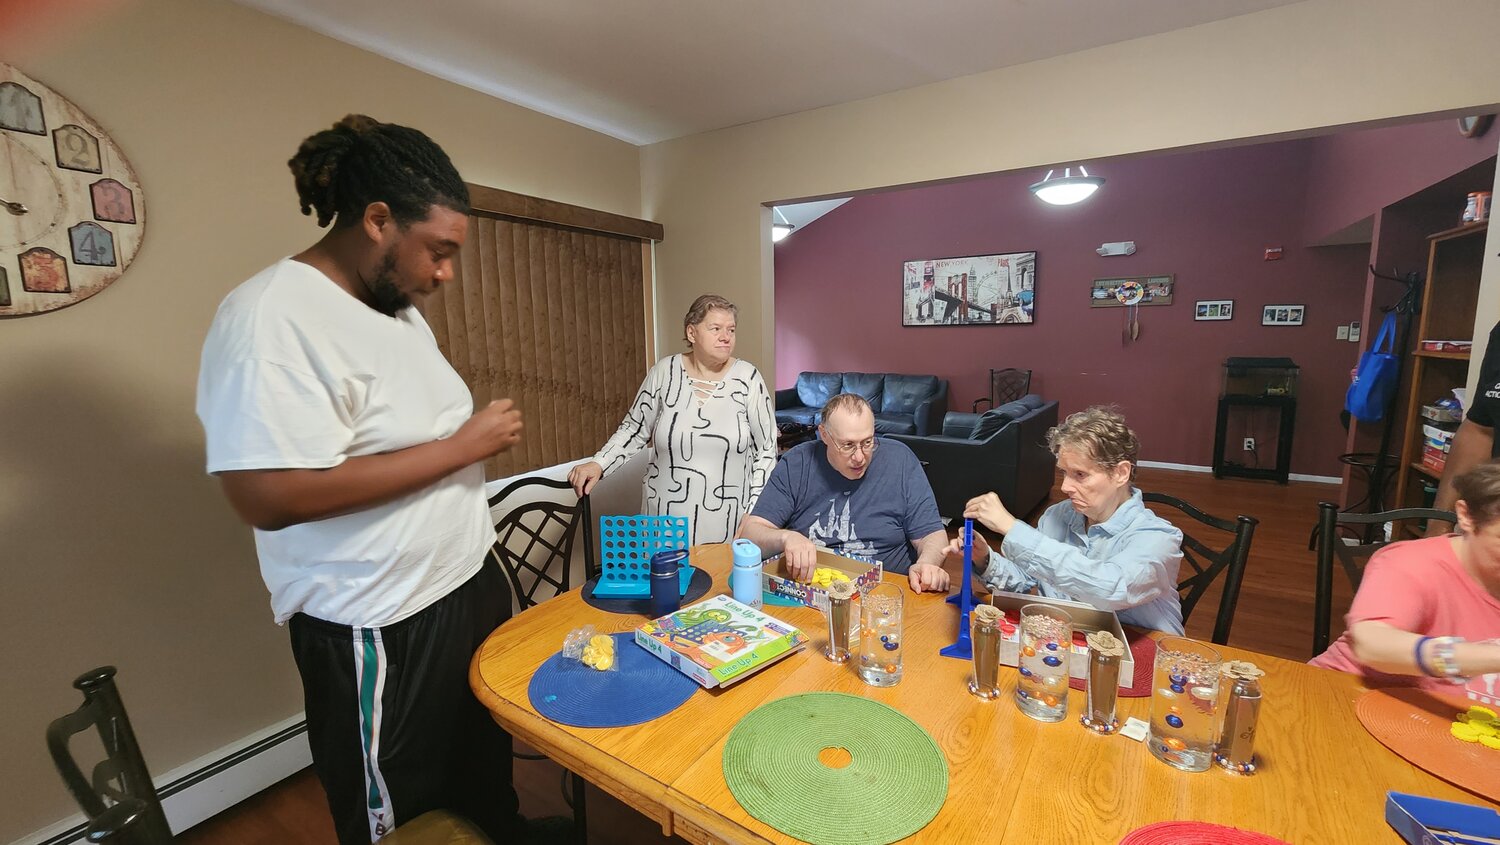 Juon Hodge plays many board games with residents Pauline Wisz, Dean Davidson and Eileen Ewald.  Quality time like this forms strong bonds that make the residence truly feel like home.